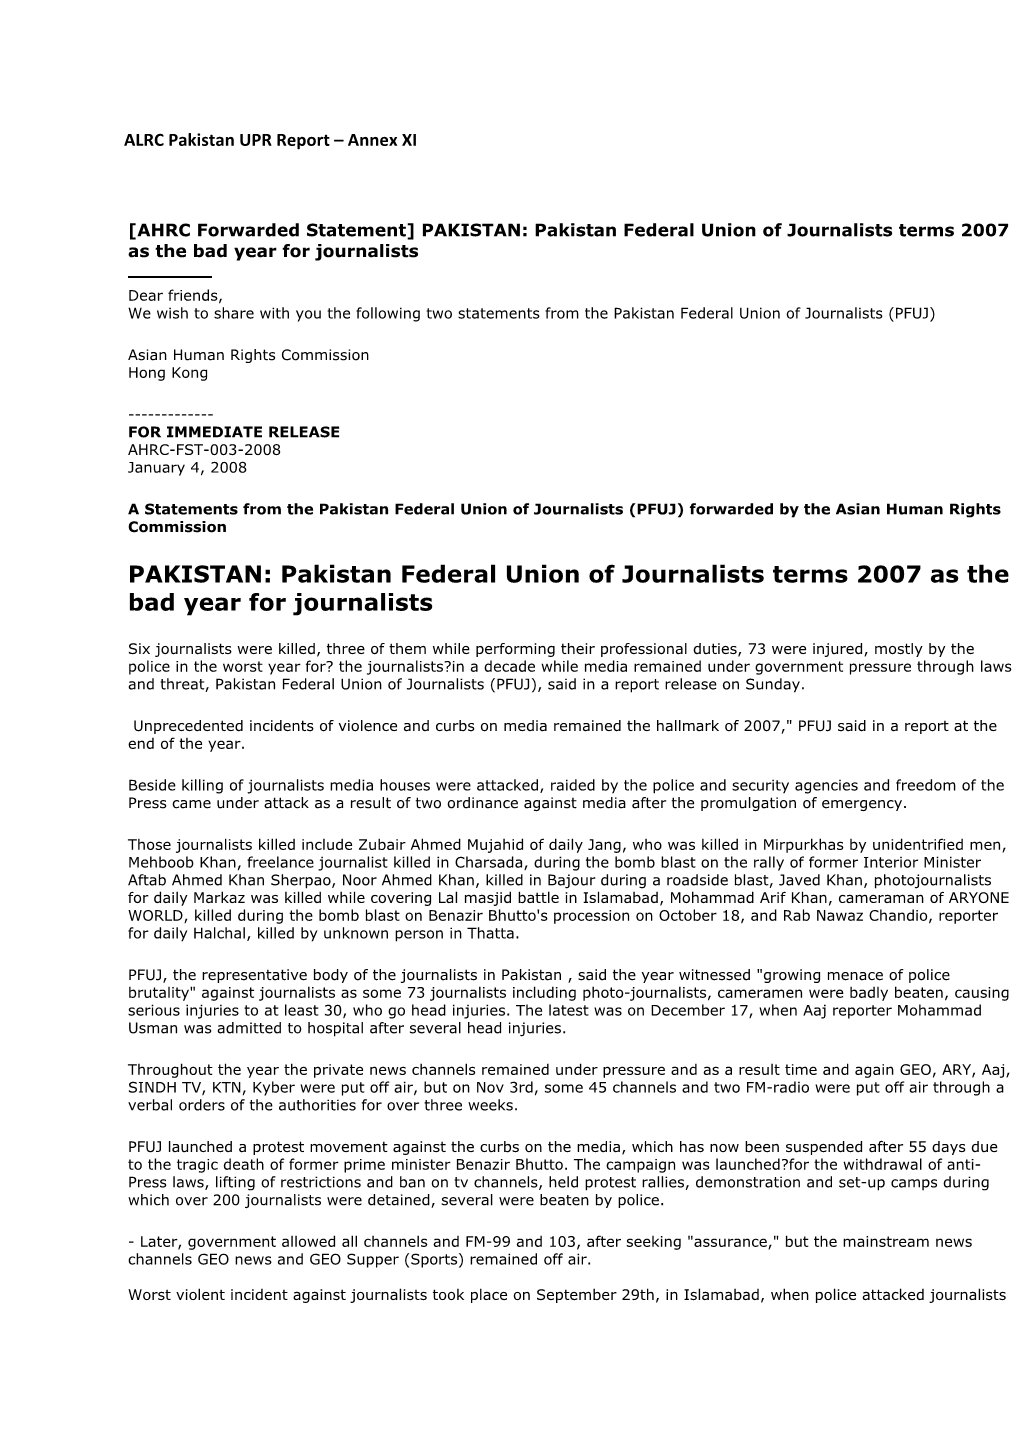 PAKISTAN: Pakistan Federal Union of Journalists Terms 2007 As the Bad Year for Journalists